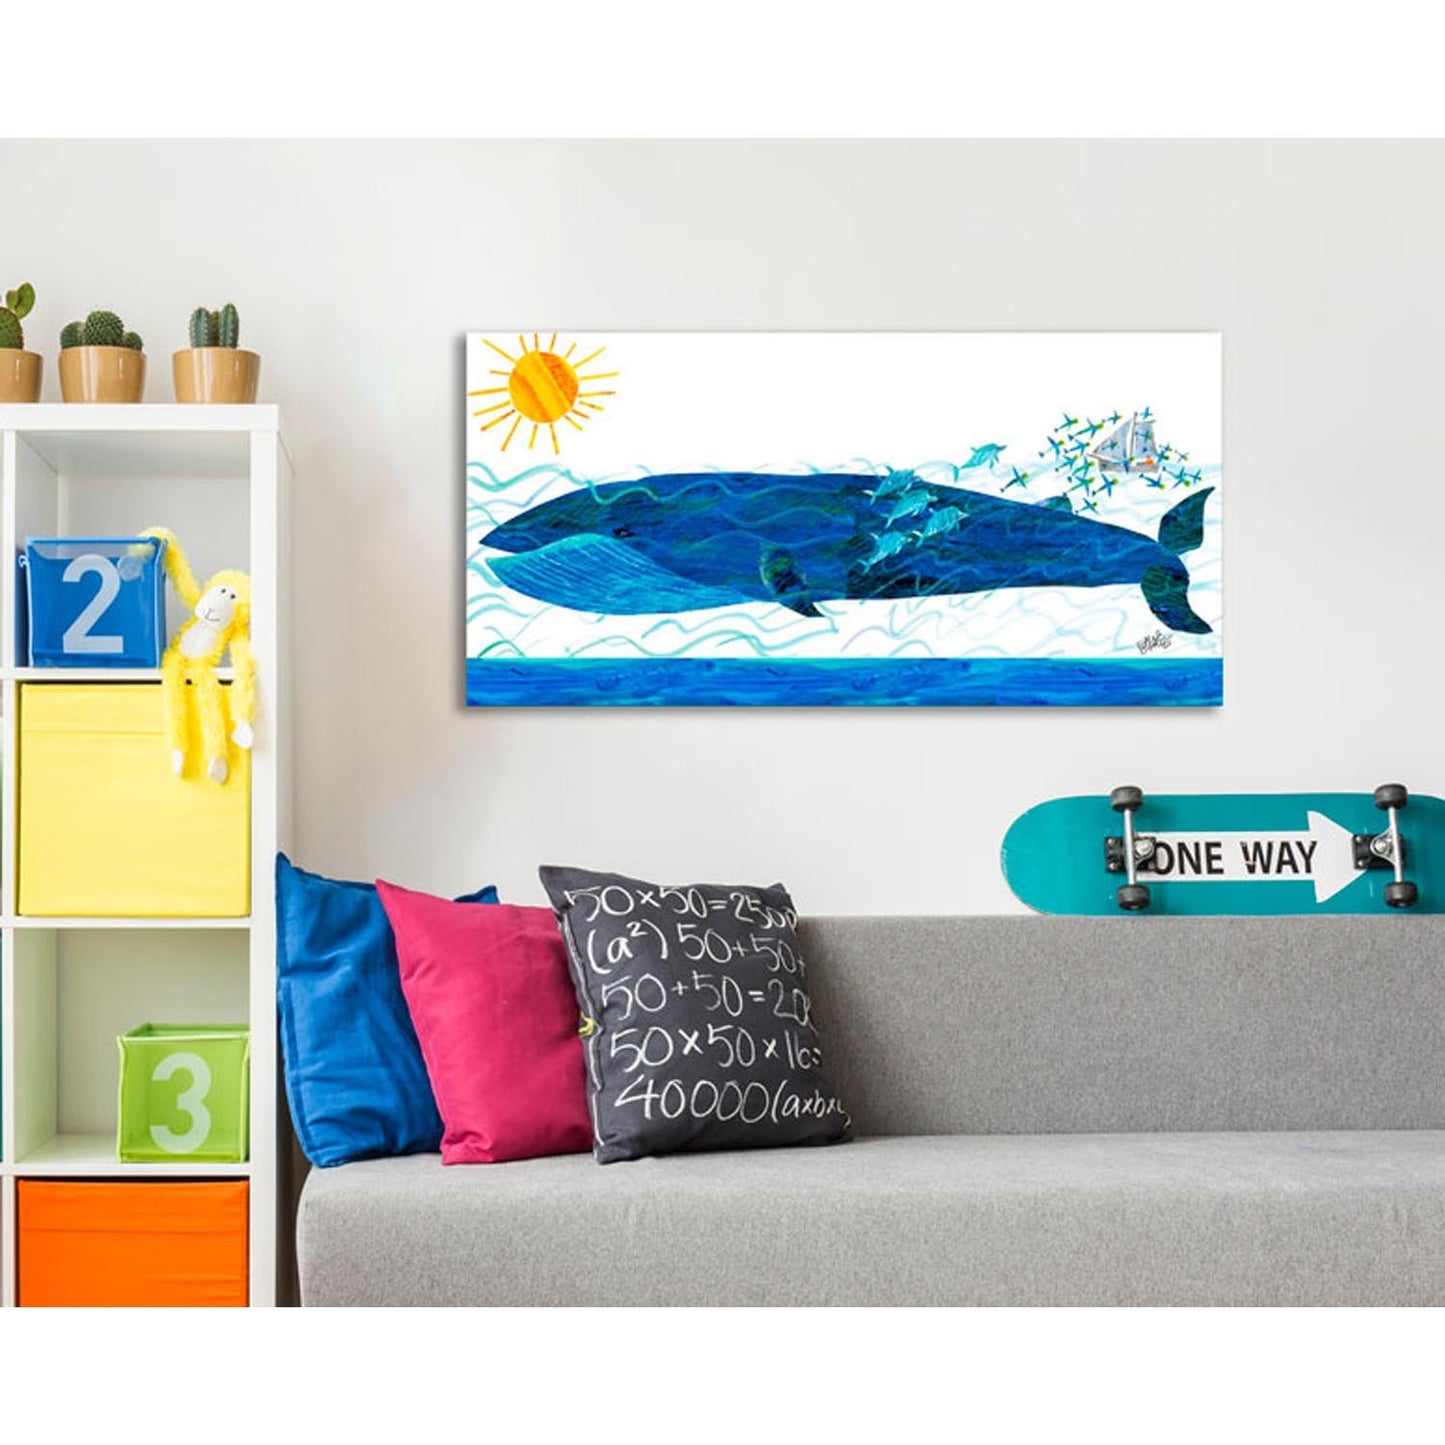 Eric Carle's Whale and Friends Canvas Wall Art